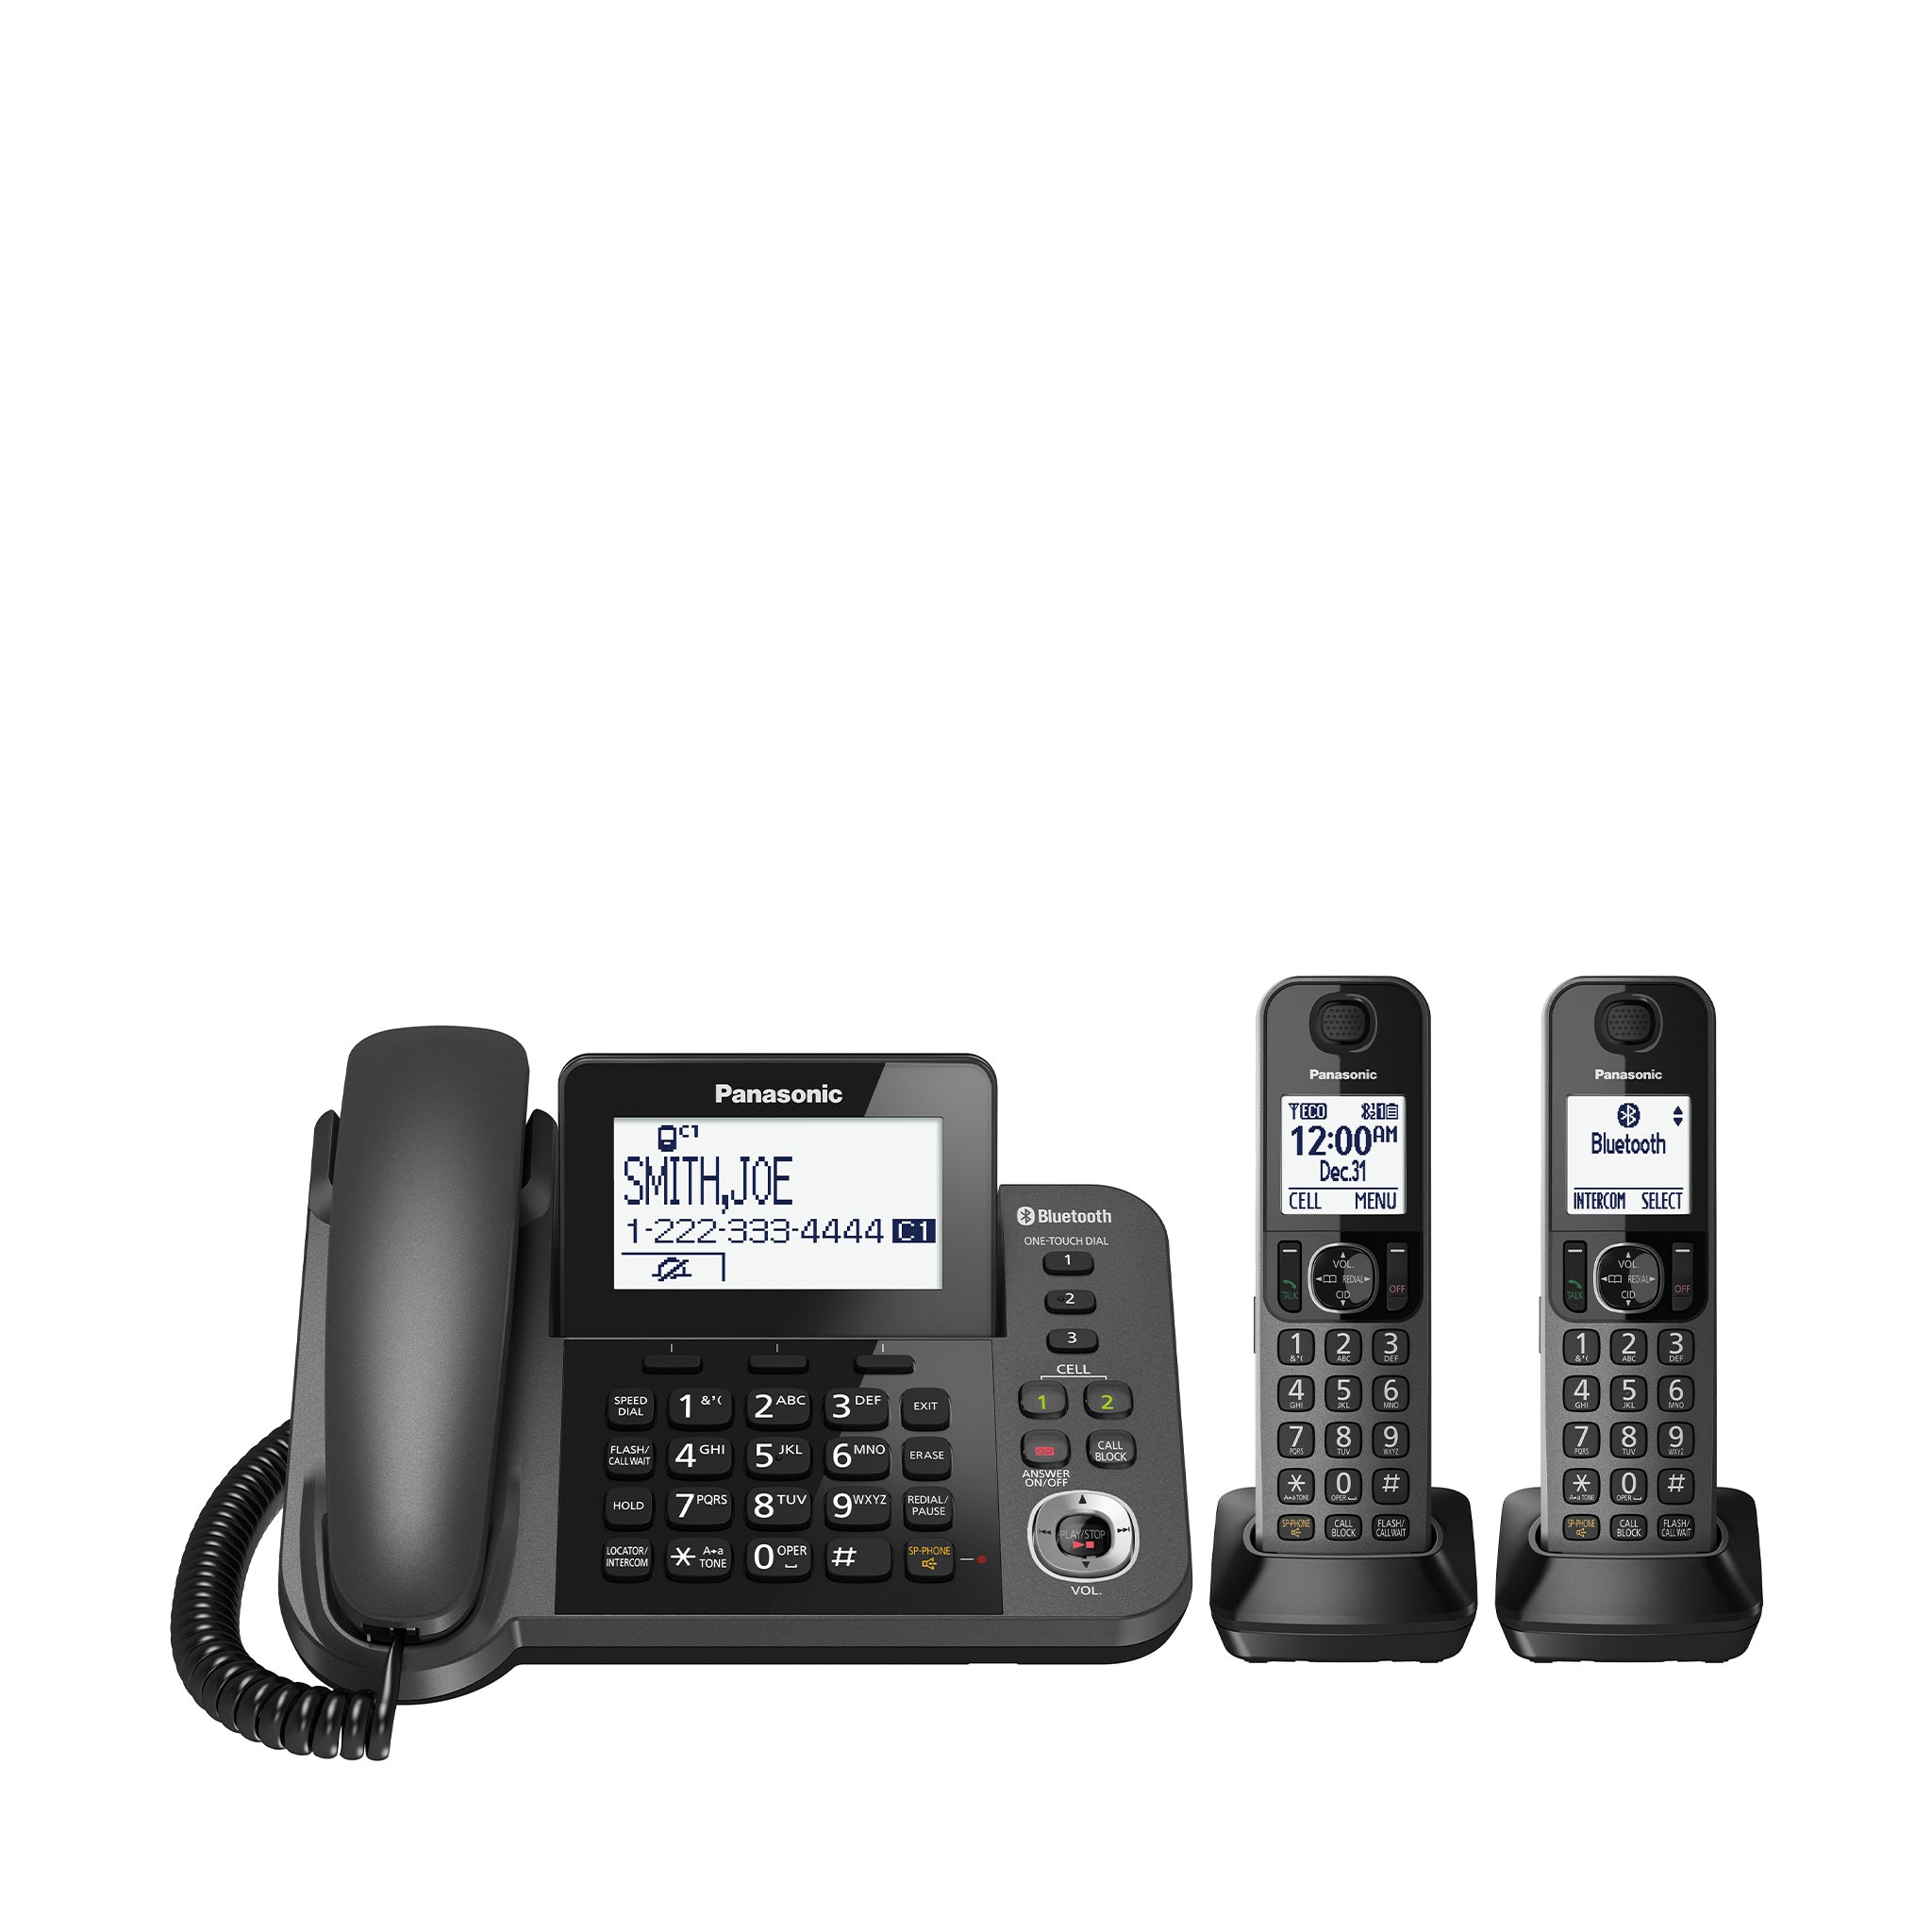 Panasonic Expandable Cordless Phone System with Answering Machine, Amber  Backlit Display and Call Block - 2 Handsets – KX-TGC362B (Black)